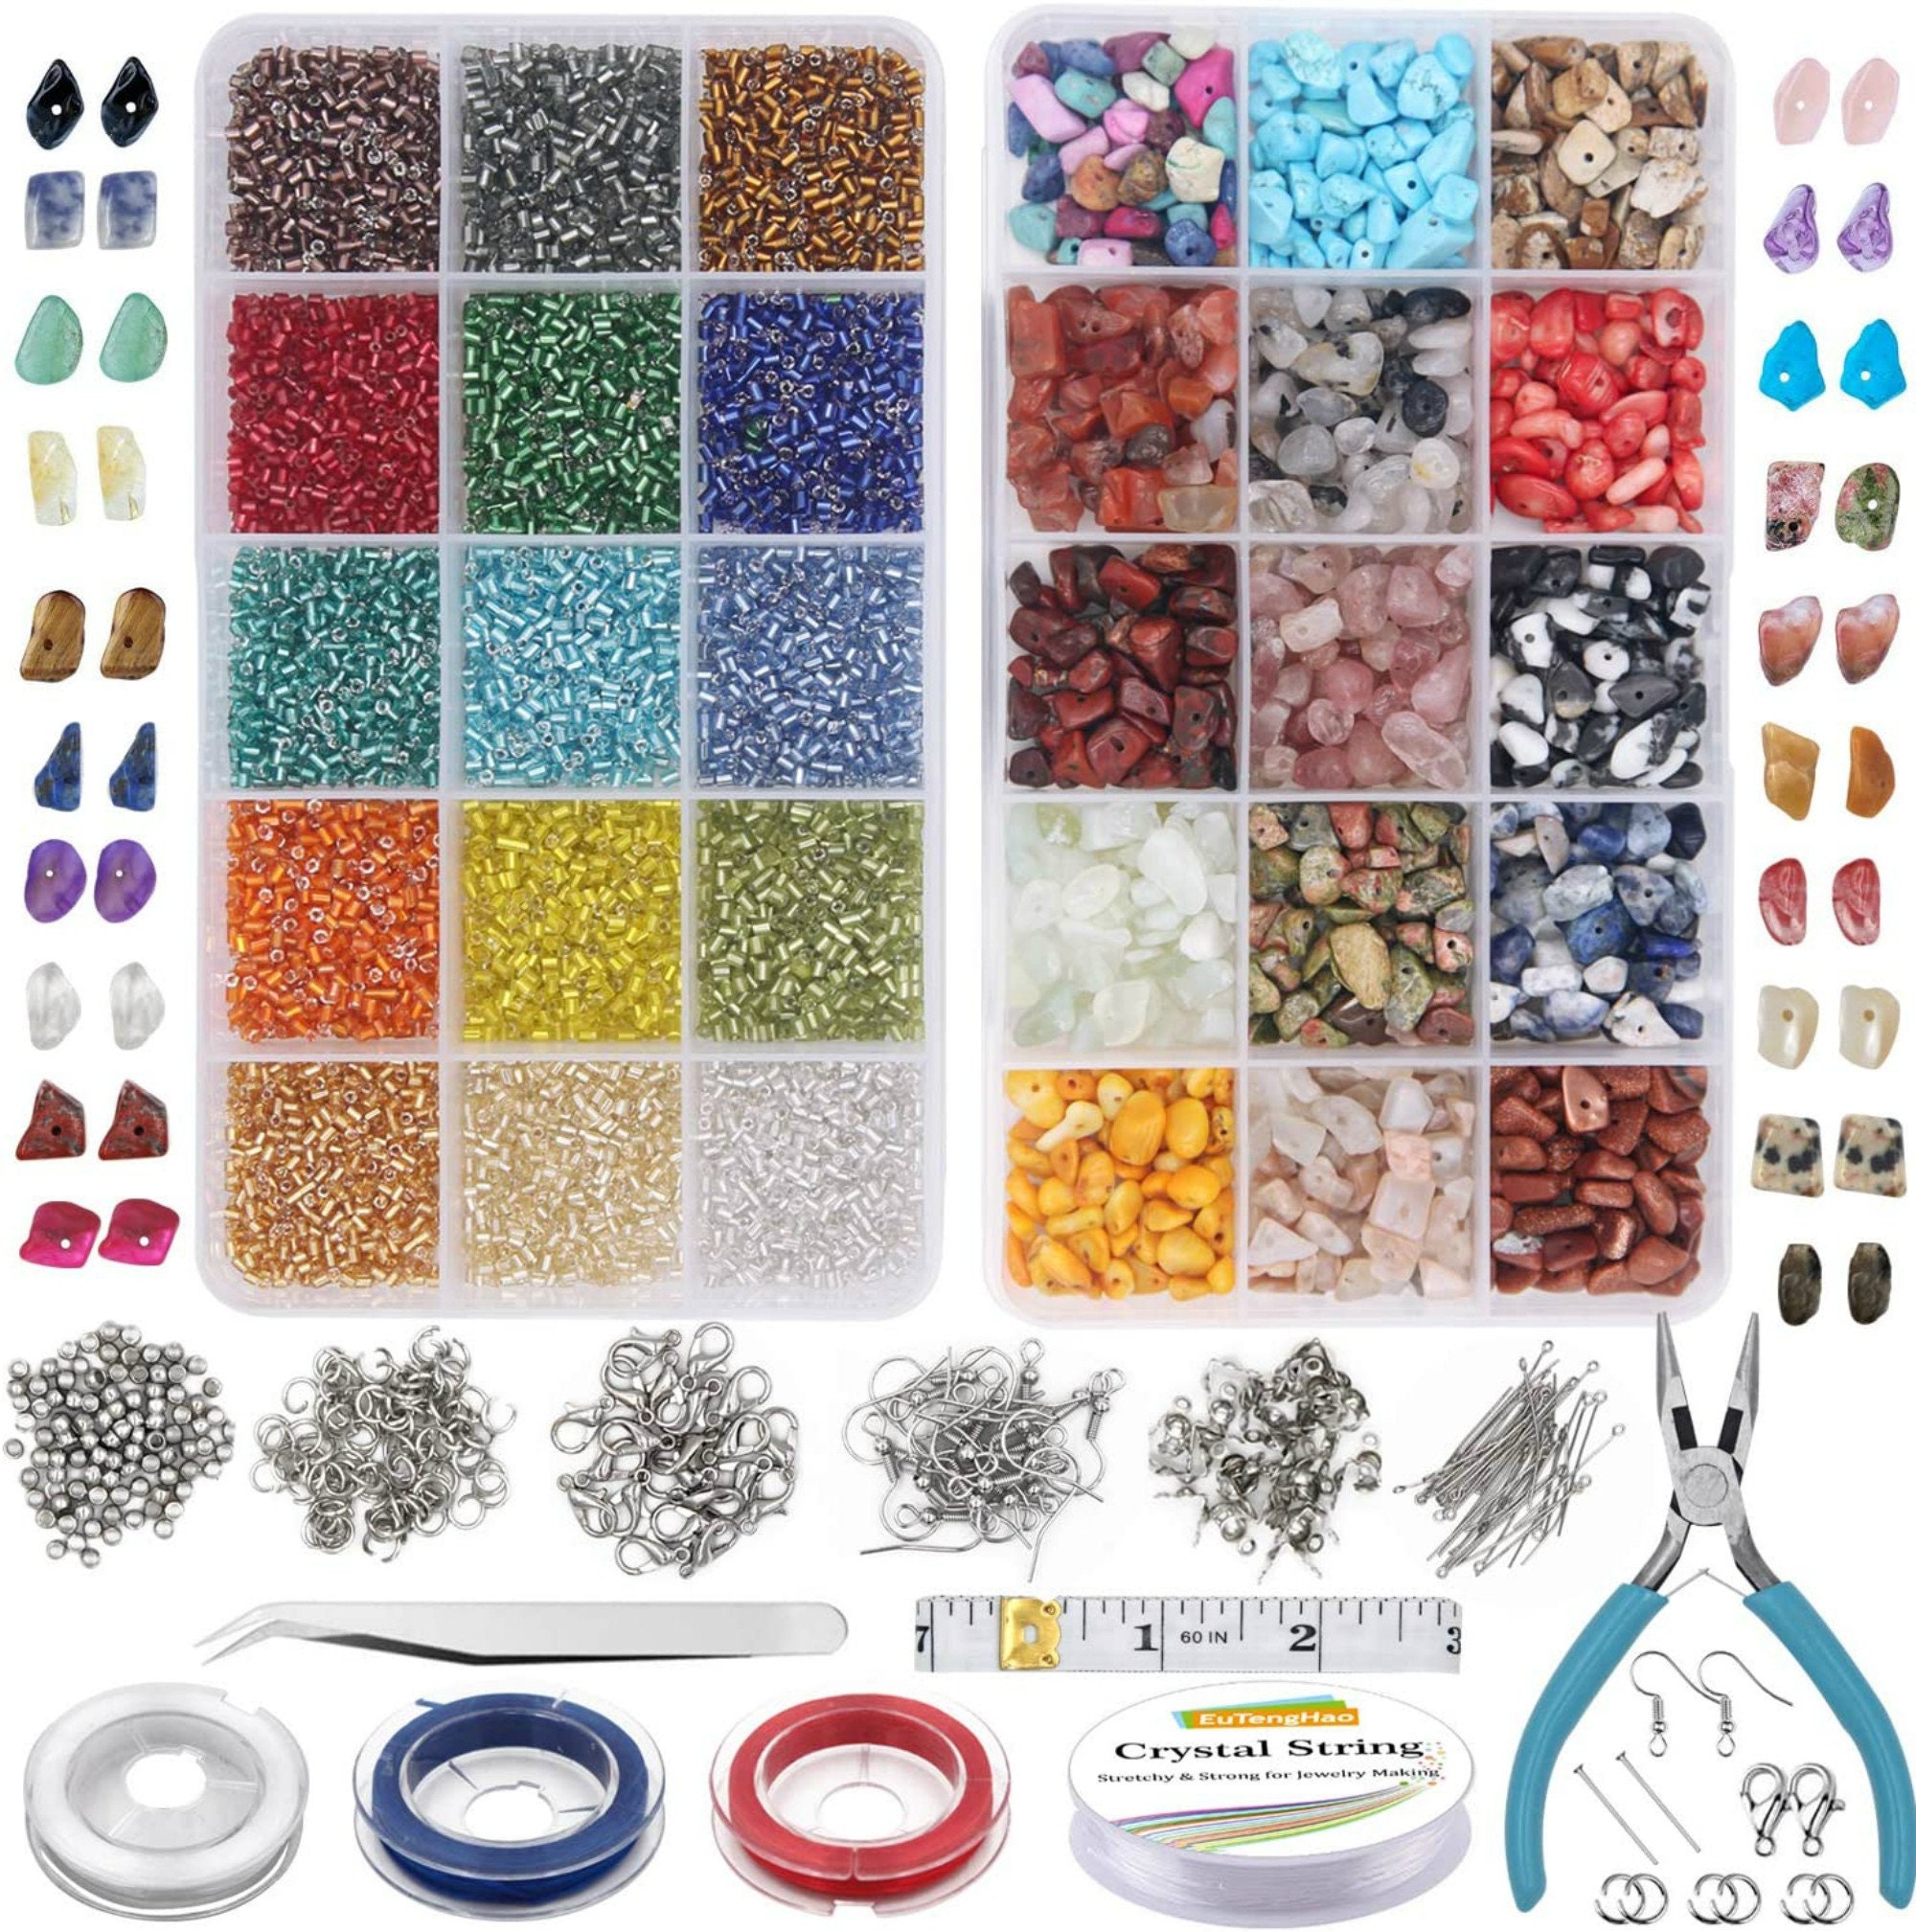 1200PCS Glass Beads for Jewelry Making, 40 Colors 8mm Crystal Beads  Bracelet Making Kit Glass Beads Bulk for Bracelets Making Kit Jewelry  Making